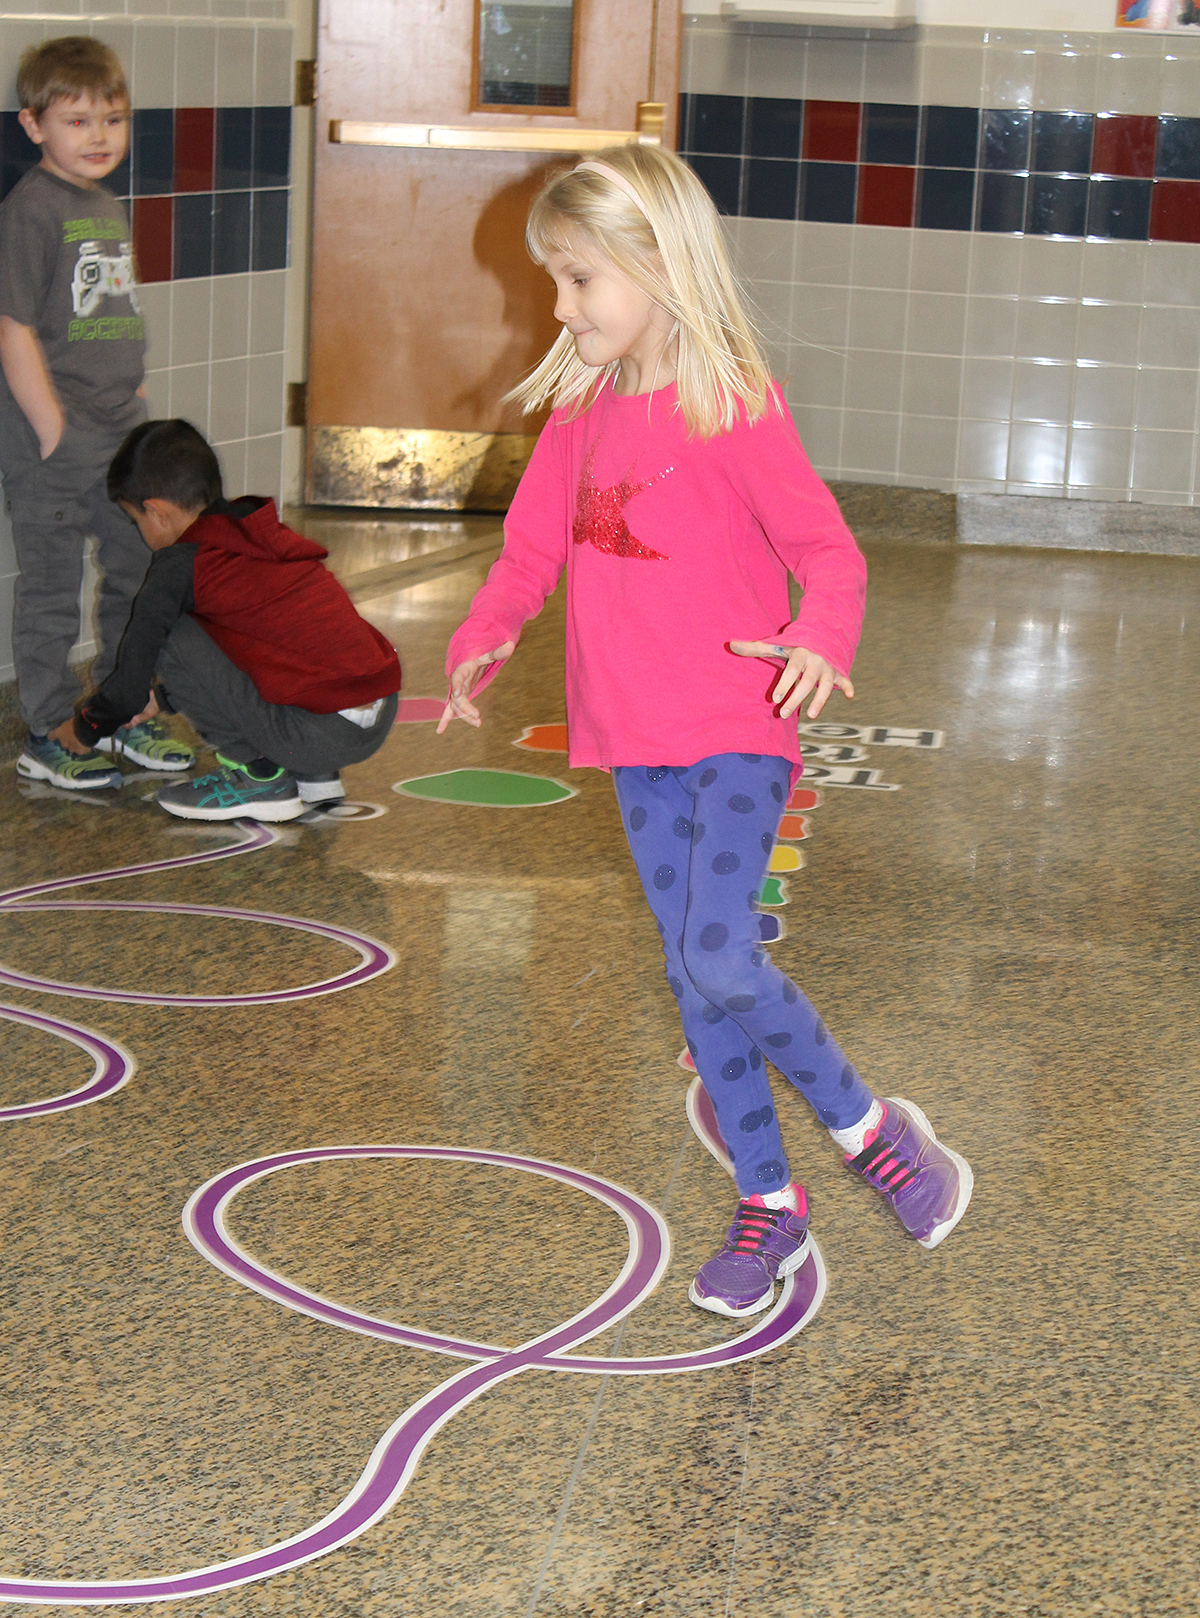 Students smiling as they walk on sticker path in hallway.